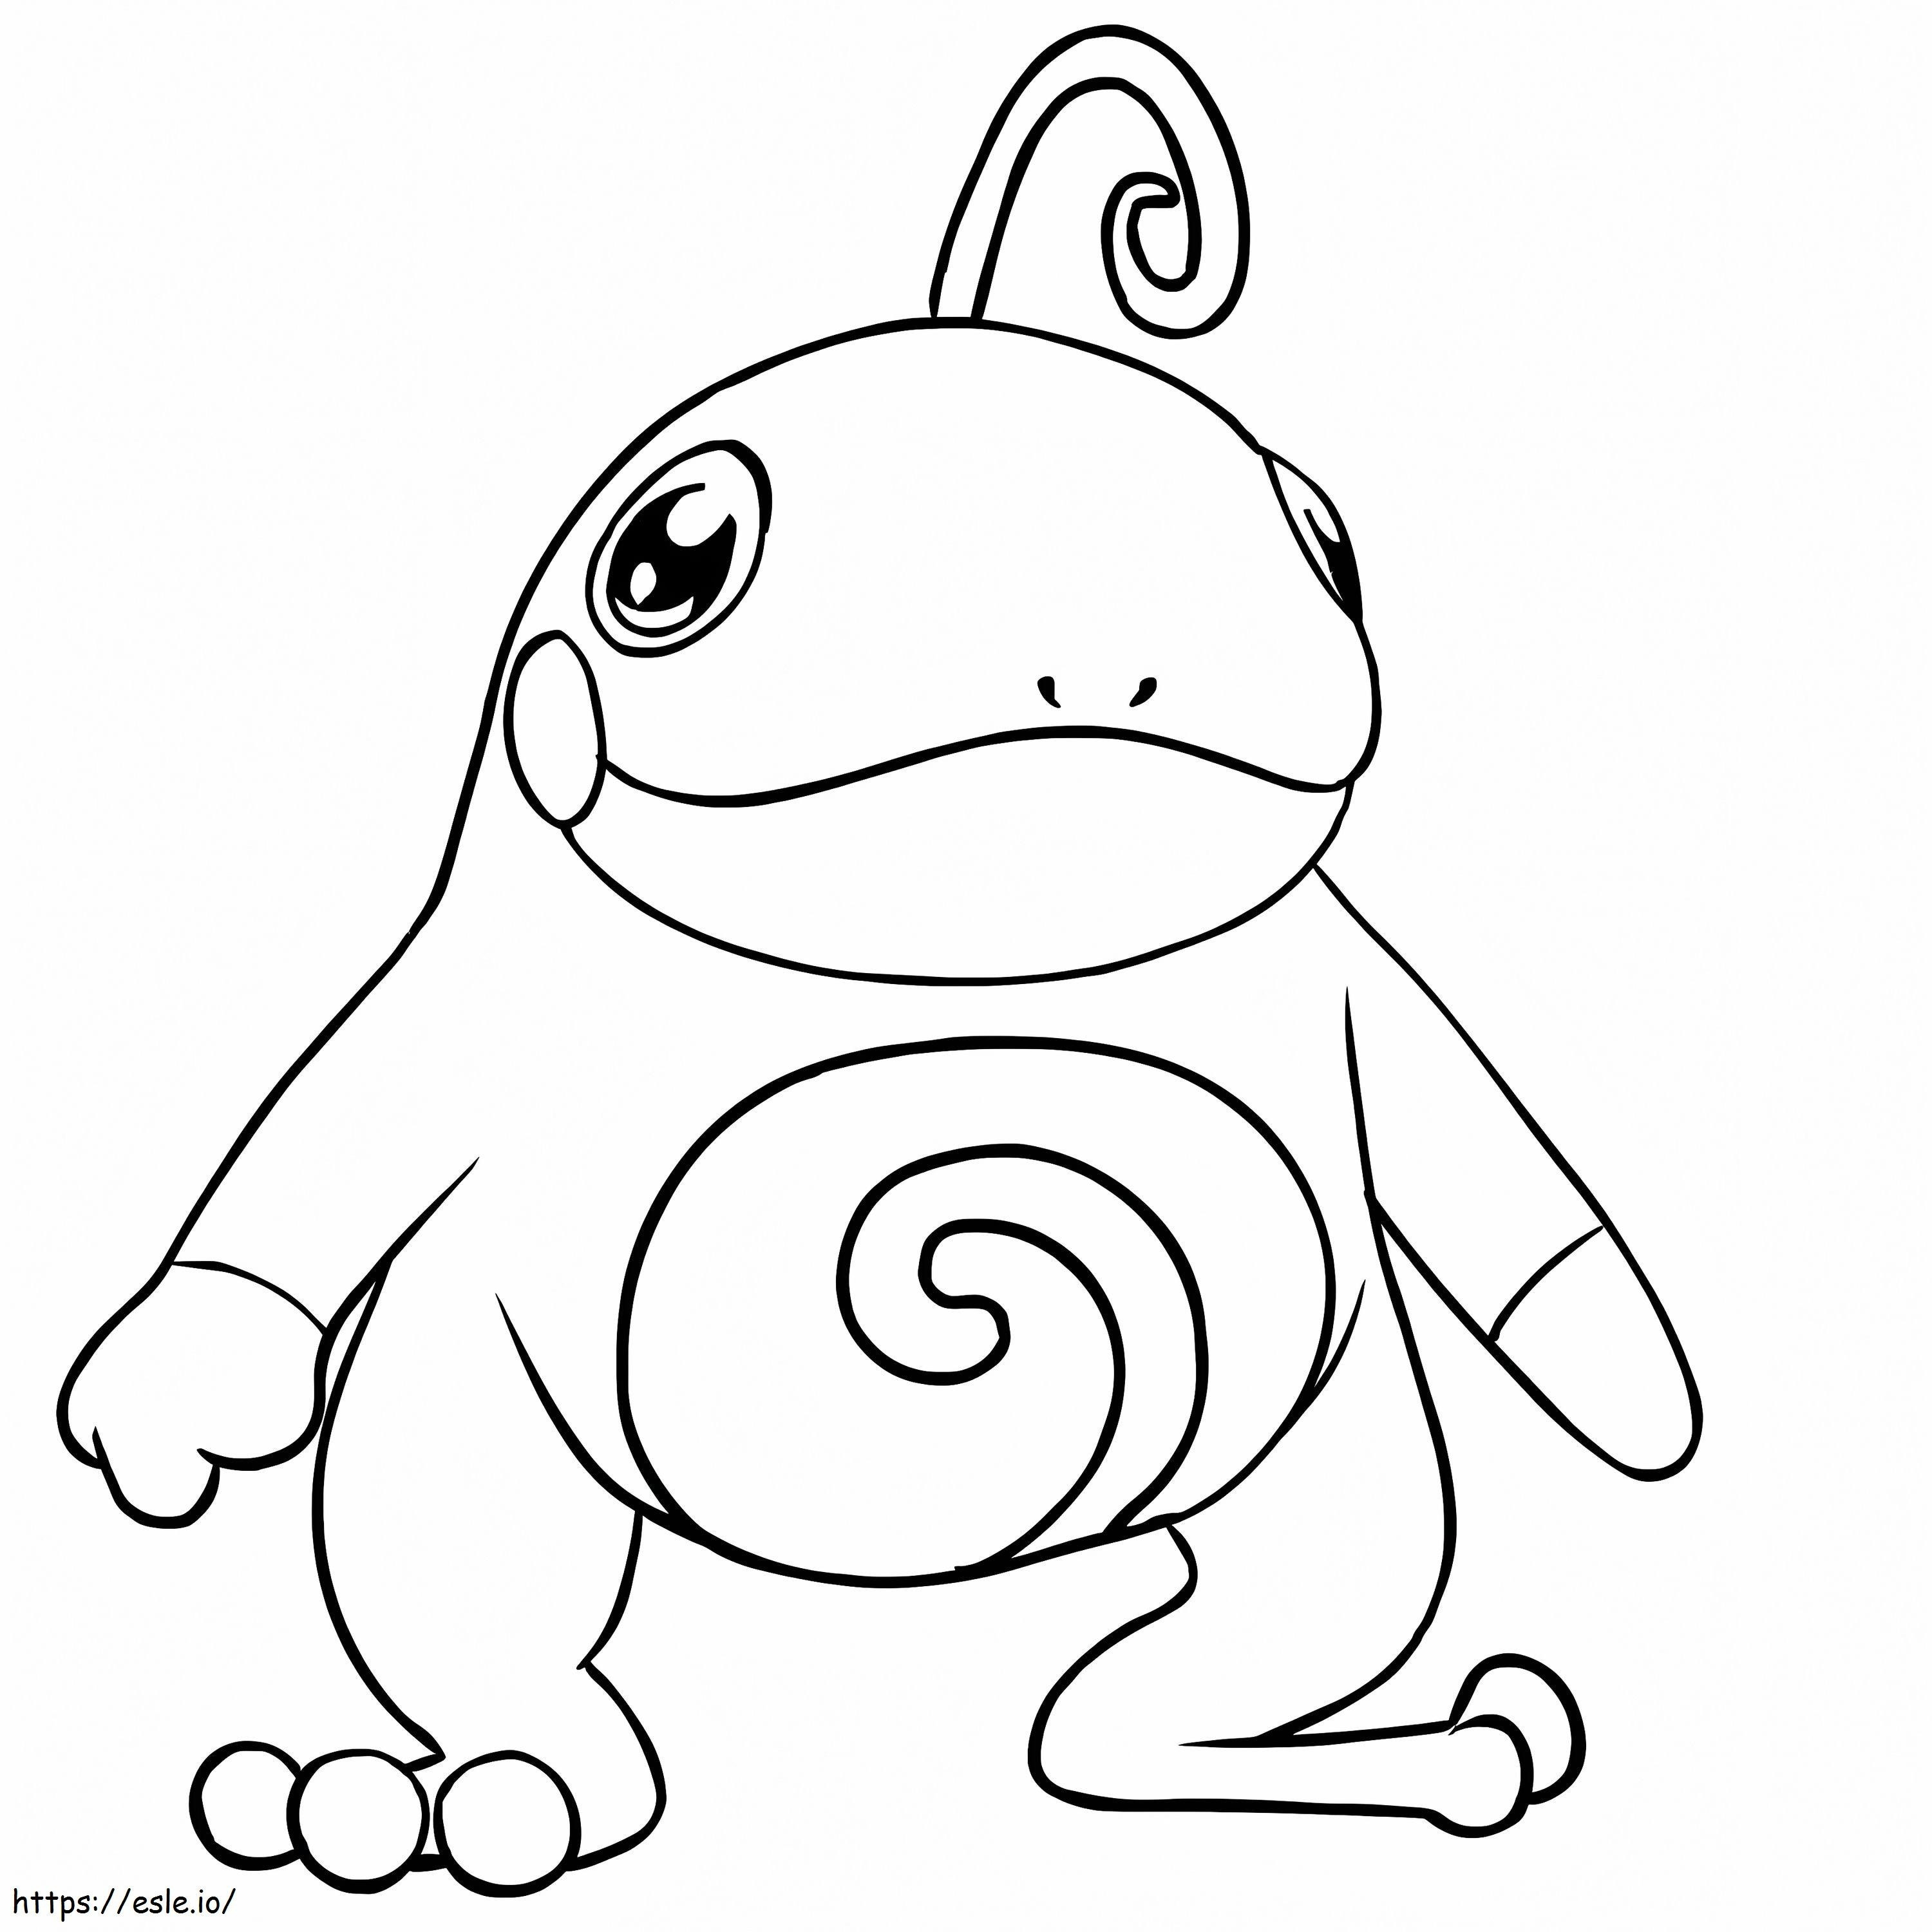 Cute Politoed coloring page